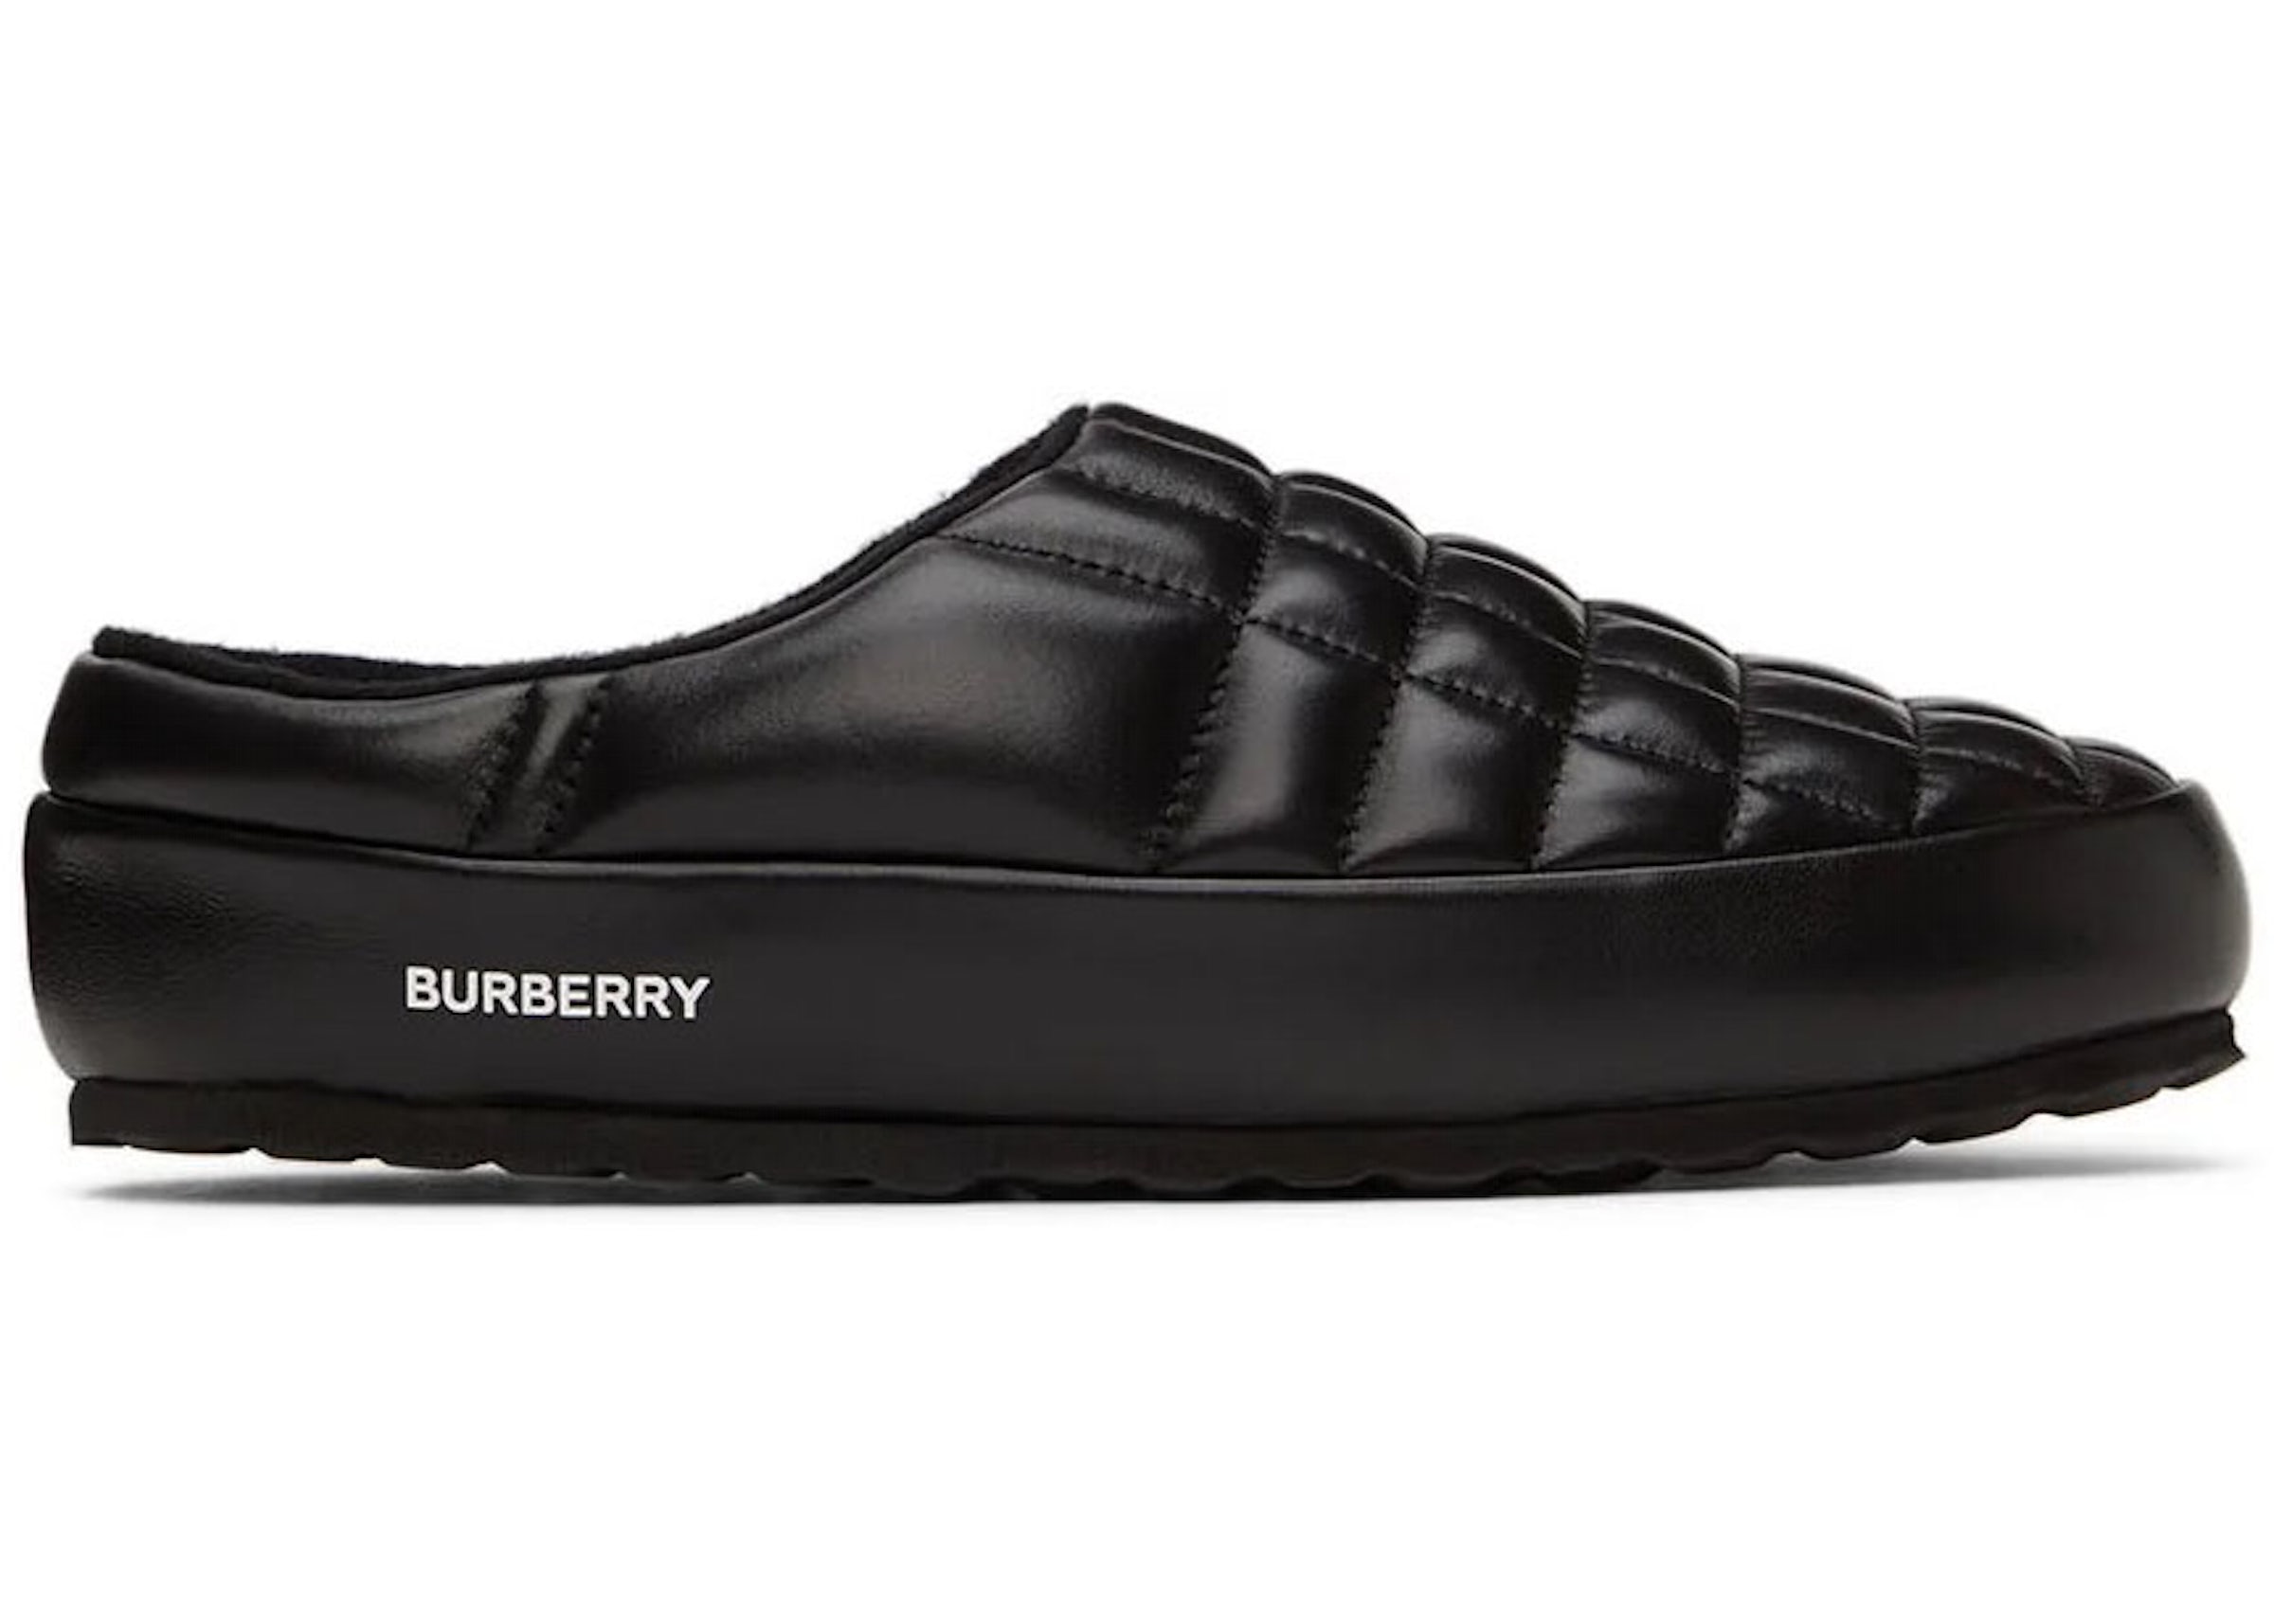 Burberry Leather Quilted Slipper